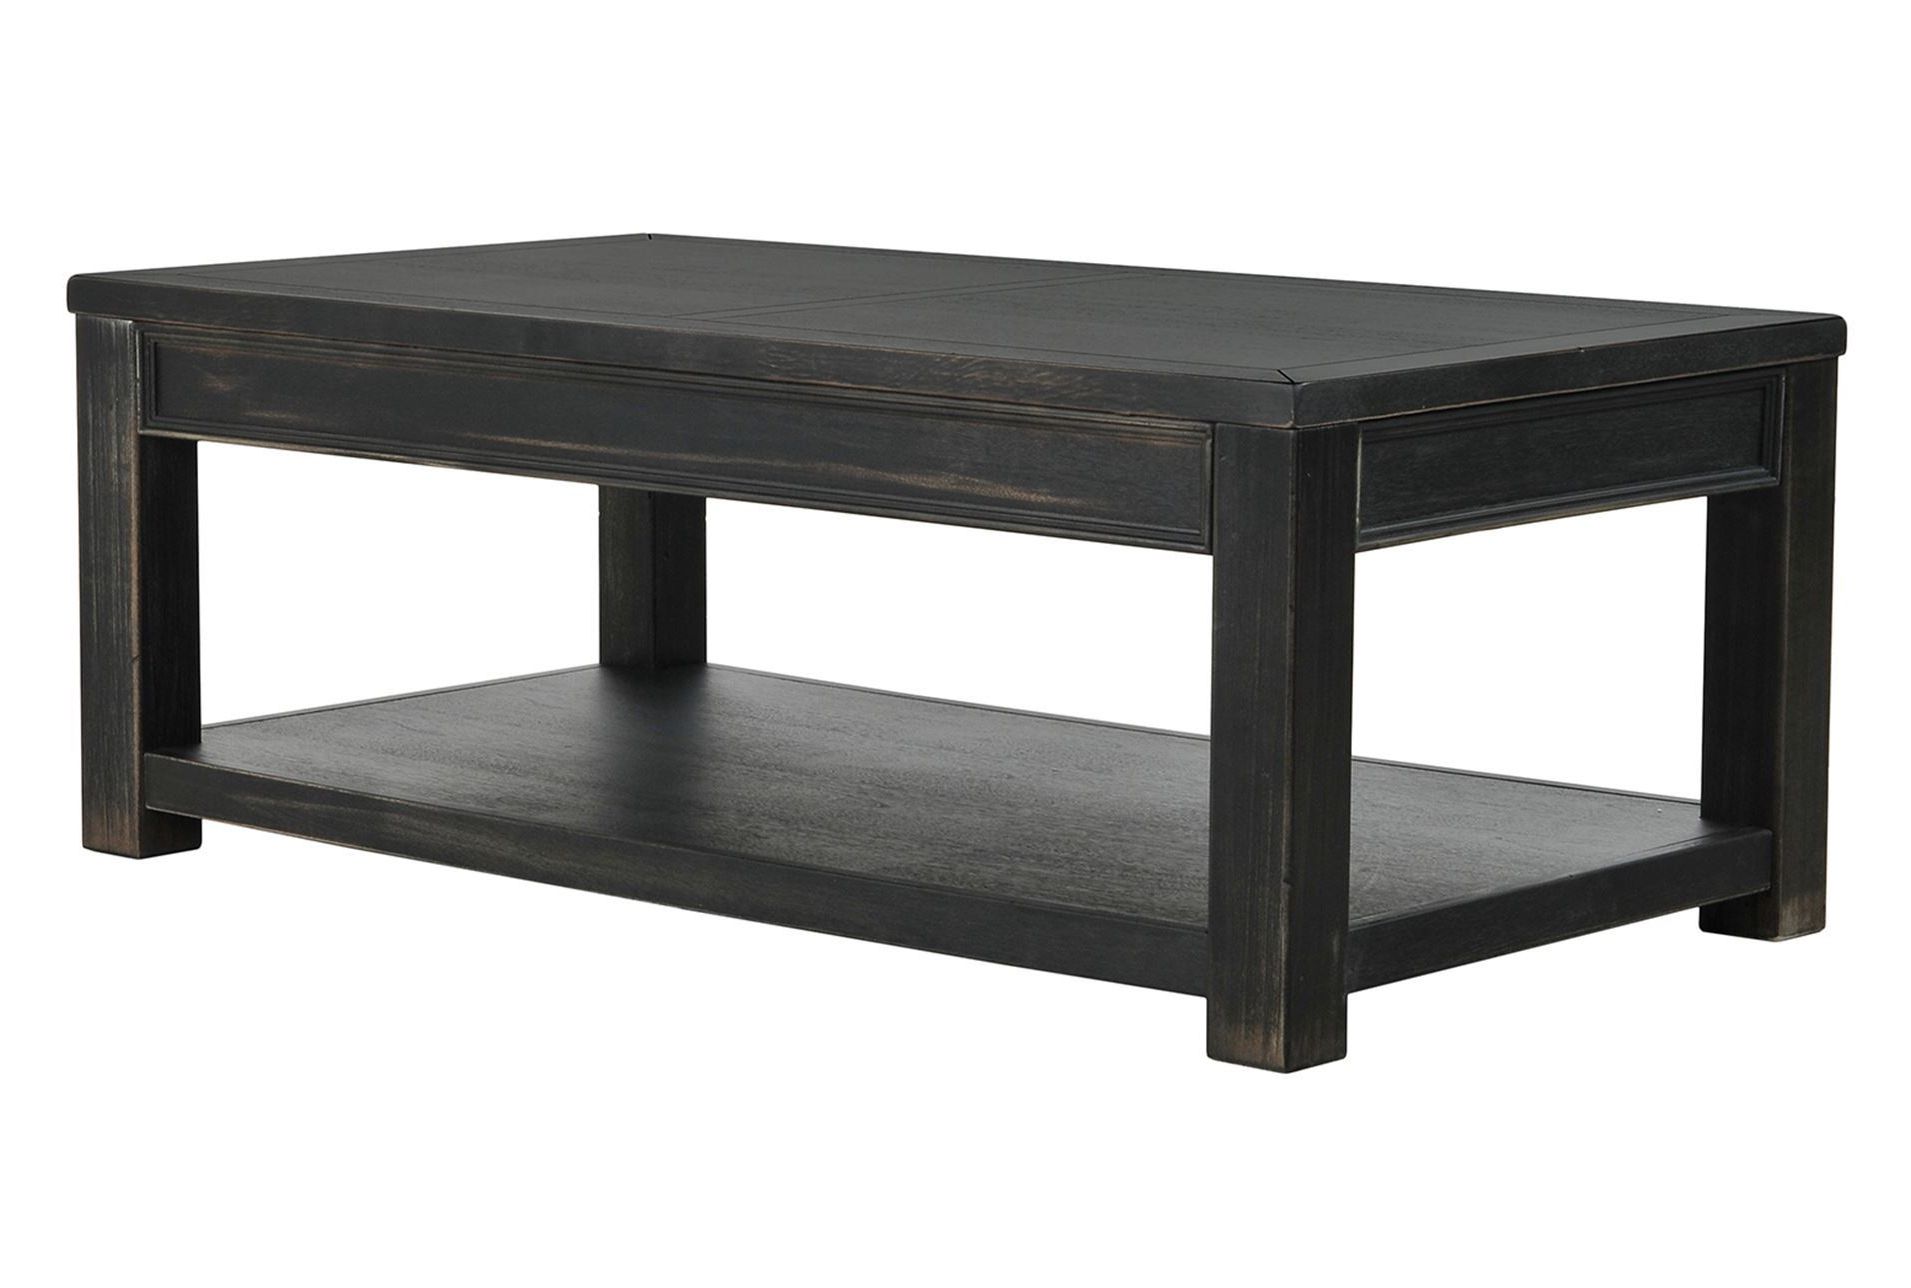 Favorite Coffee Table: Living Spaces Coffee Table Living Spaces End Tables With Ducar Cocktail Tables (View 12 of 20)